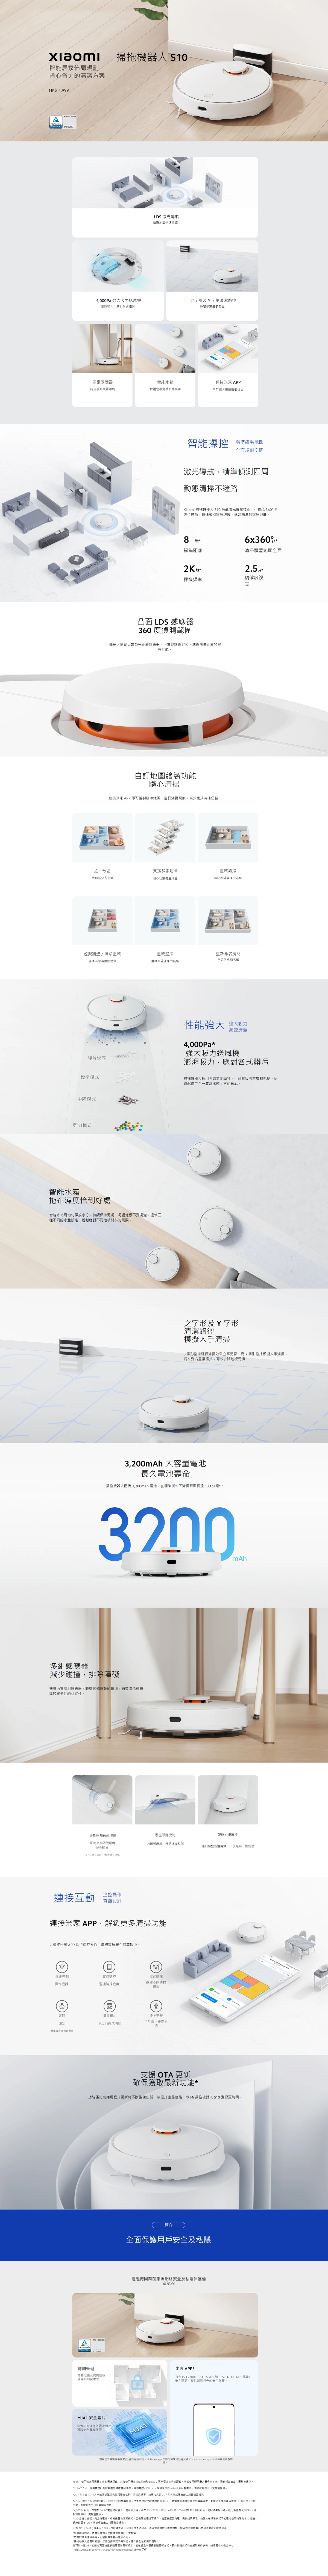 Xiaomi Vacuum Mi Robot Vacuum S10 Mop and Sweep 4000Pa Powerful Suction LDS  BHR6388GB - White